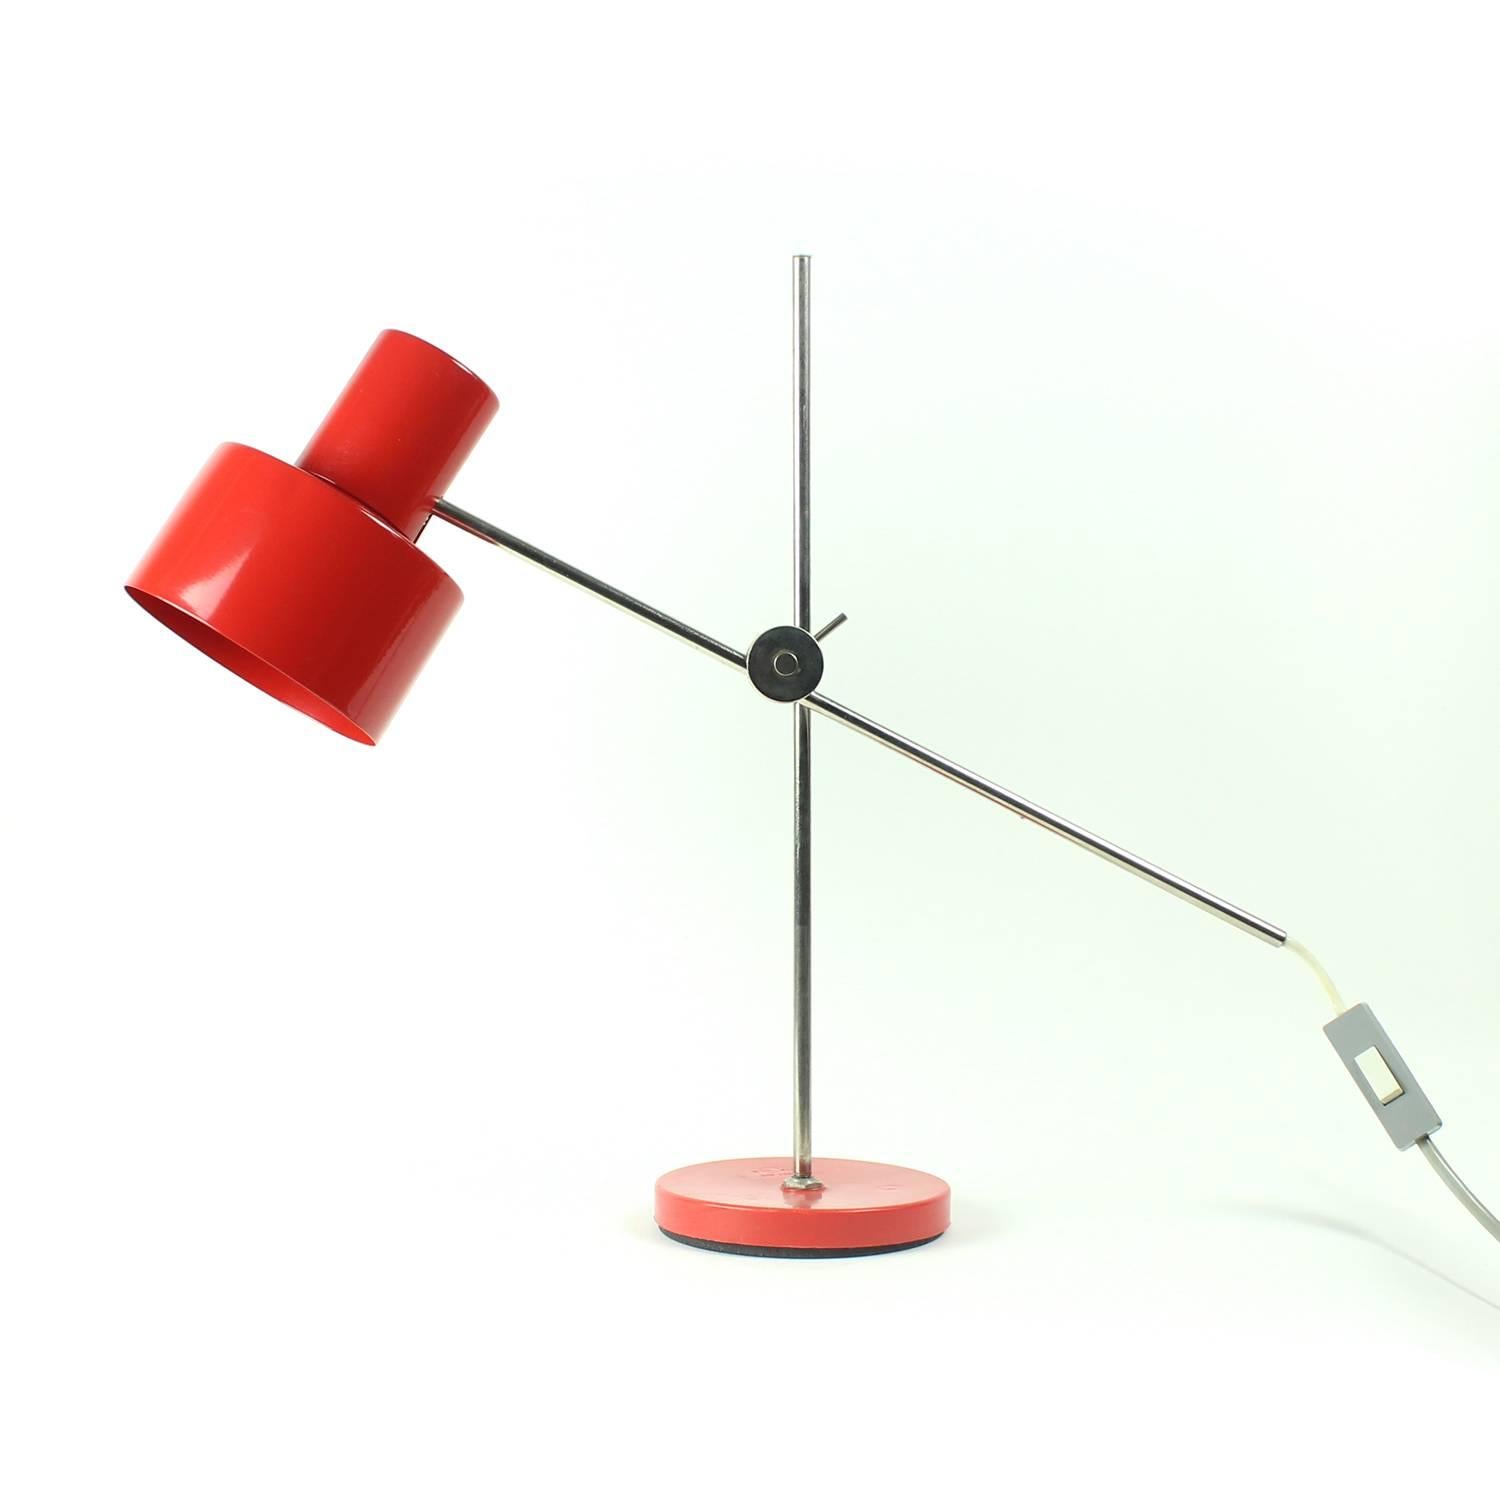 This simple and stylish lamp named type 1012 01 comes is considered an icon in the Czechoslovakian design history. Produced by Elektrosvit National company in Czechoslovakia, designed by Jan Suchan as one of his first designs when he was just 26.